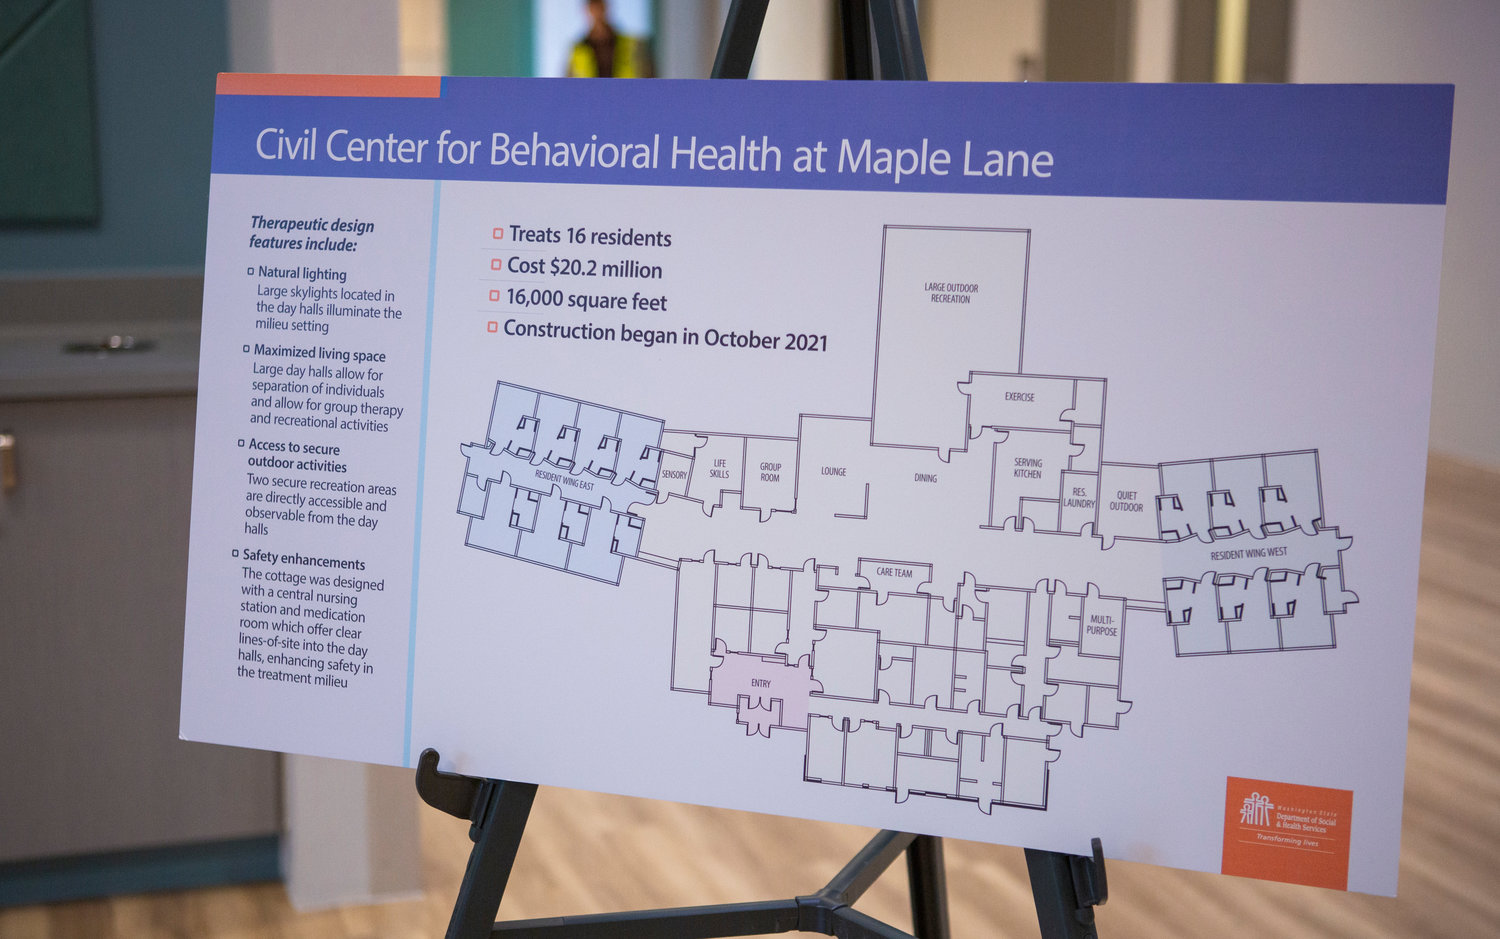 A floor plan for the Civil Center for Behavioral Health at Maple Lane School between Centralia and Rochester is pictured on display during a grand opening ceremony on Friday, Jan. 27.